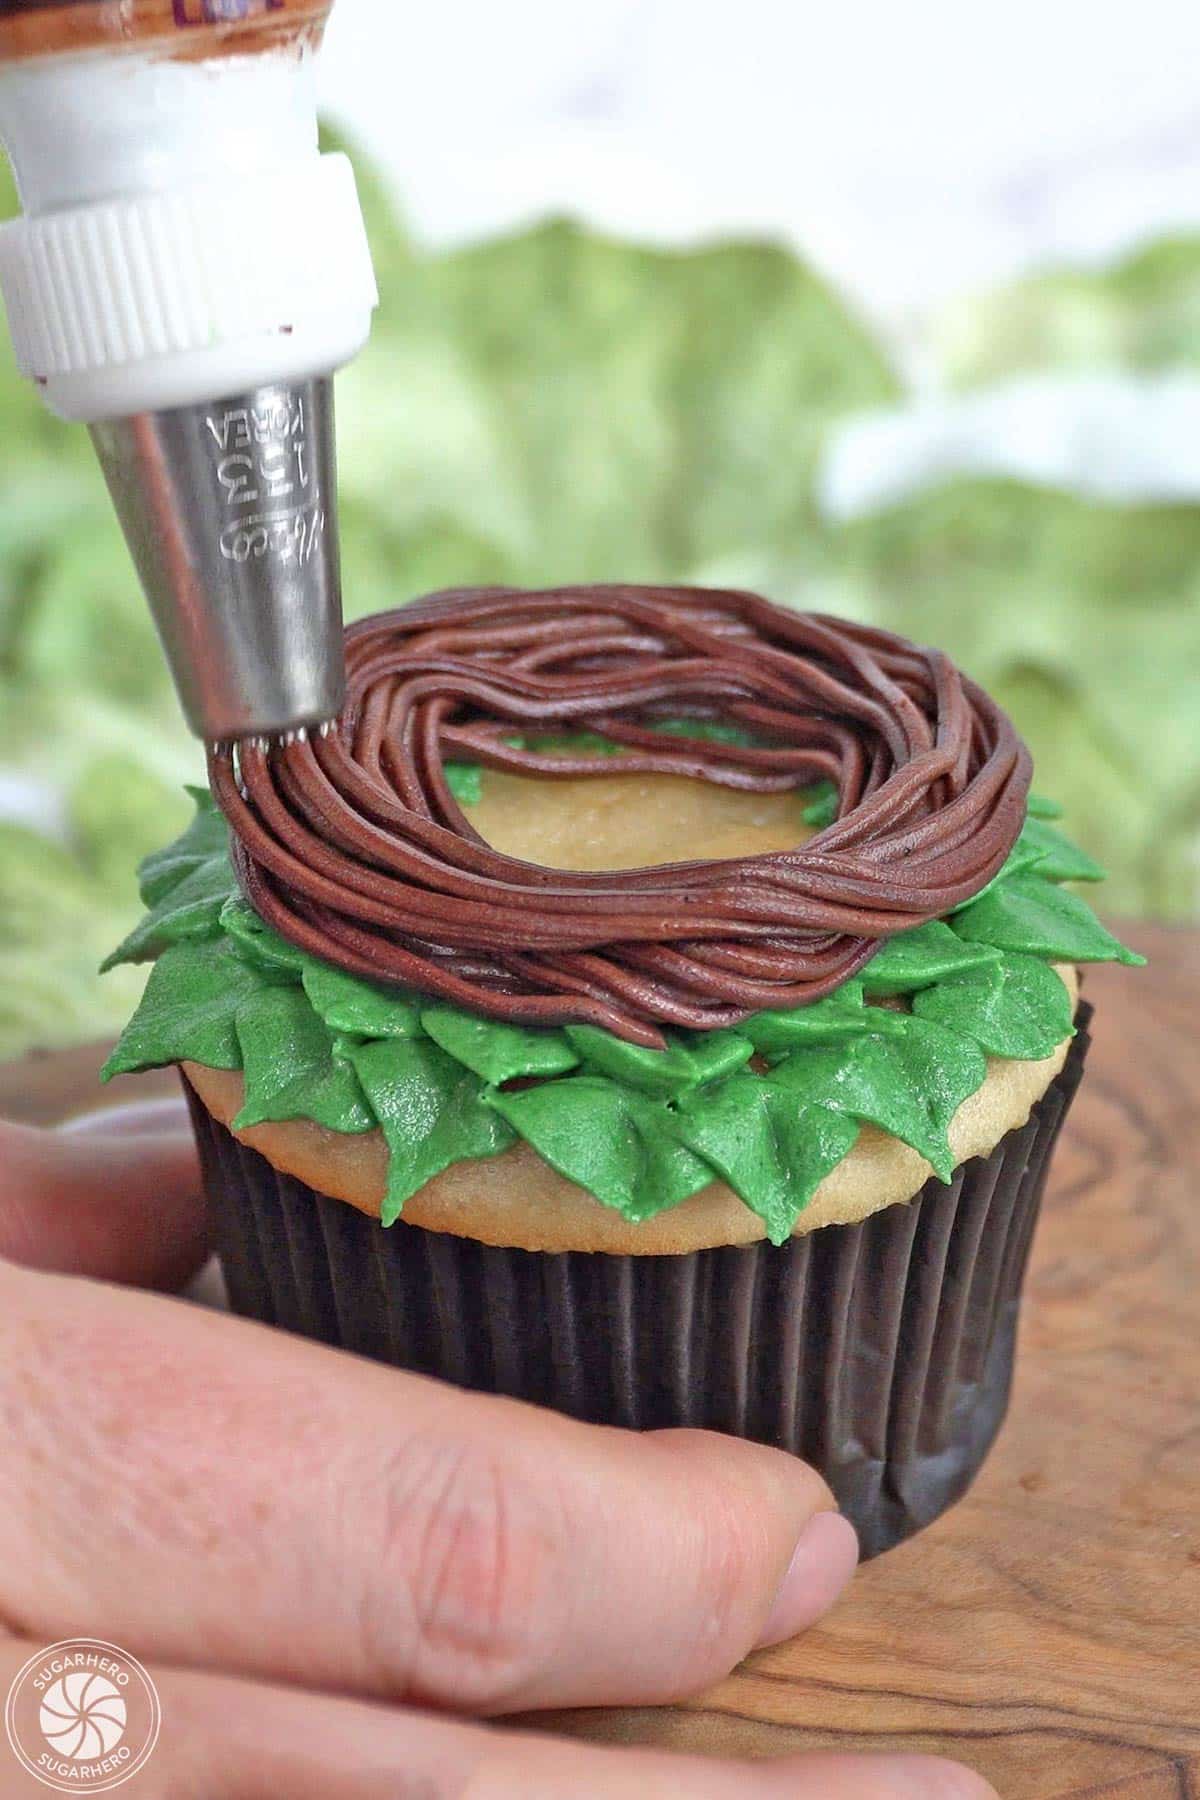 Piping a chocolate buttercream nest around the edge of a cupcake.